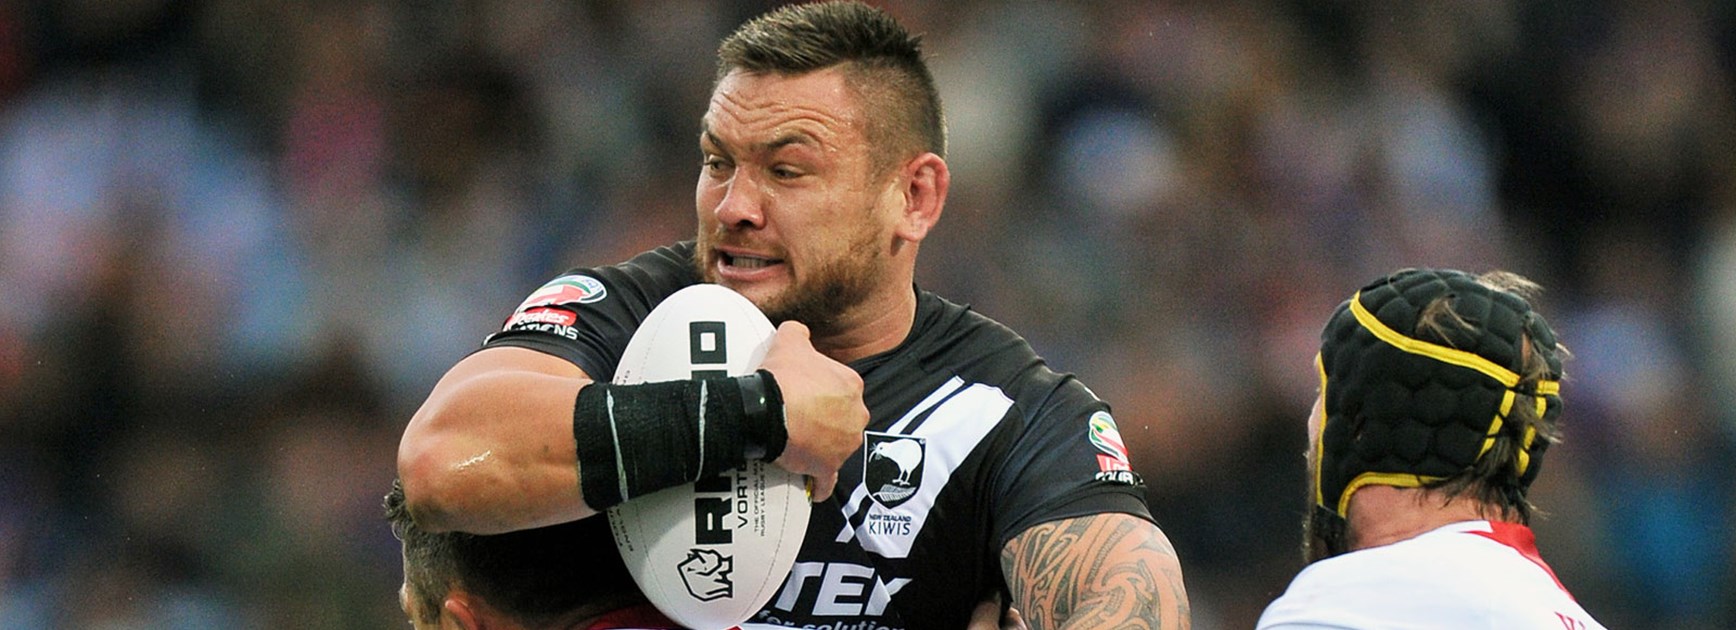 Kiwis prop Jared Waerea-Hargreaves contained by the England defence.